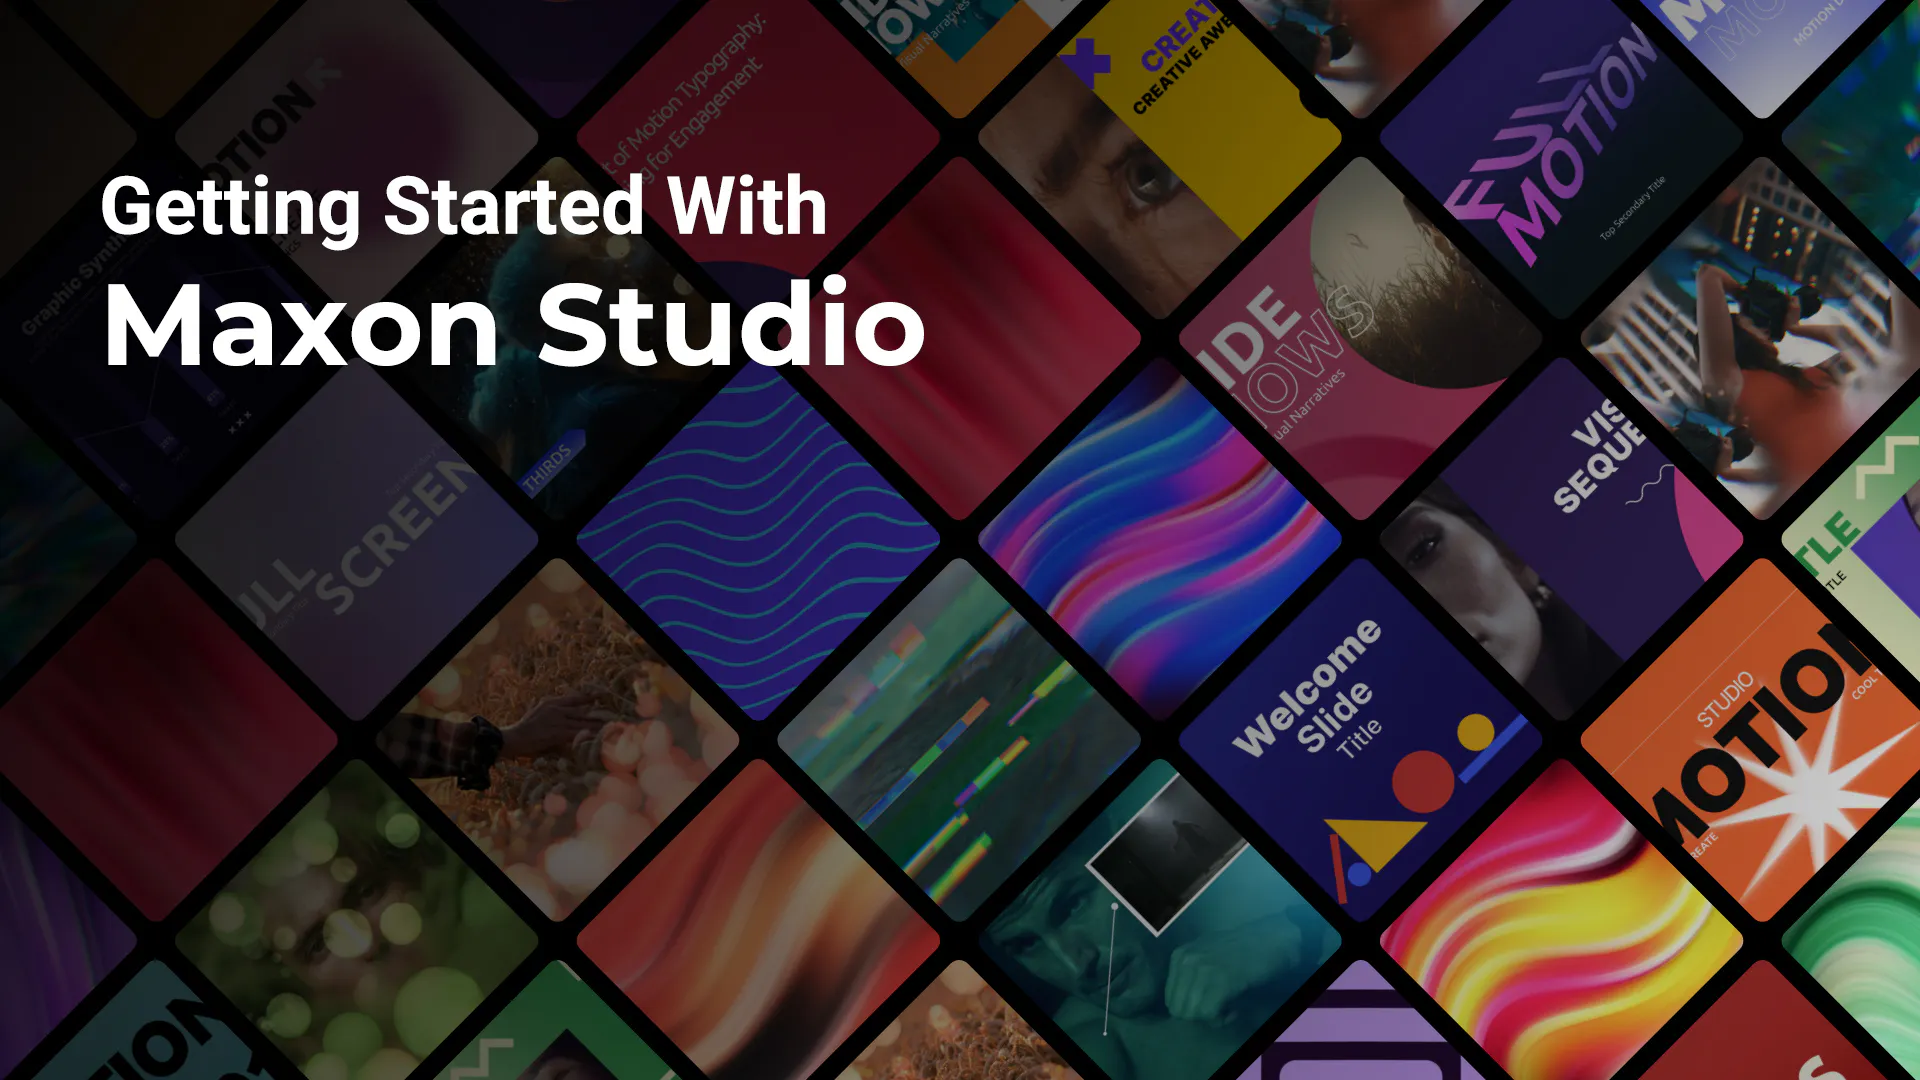 Getting Started with Maxon Studio